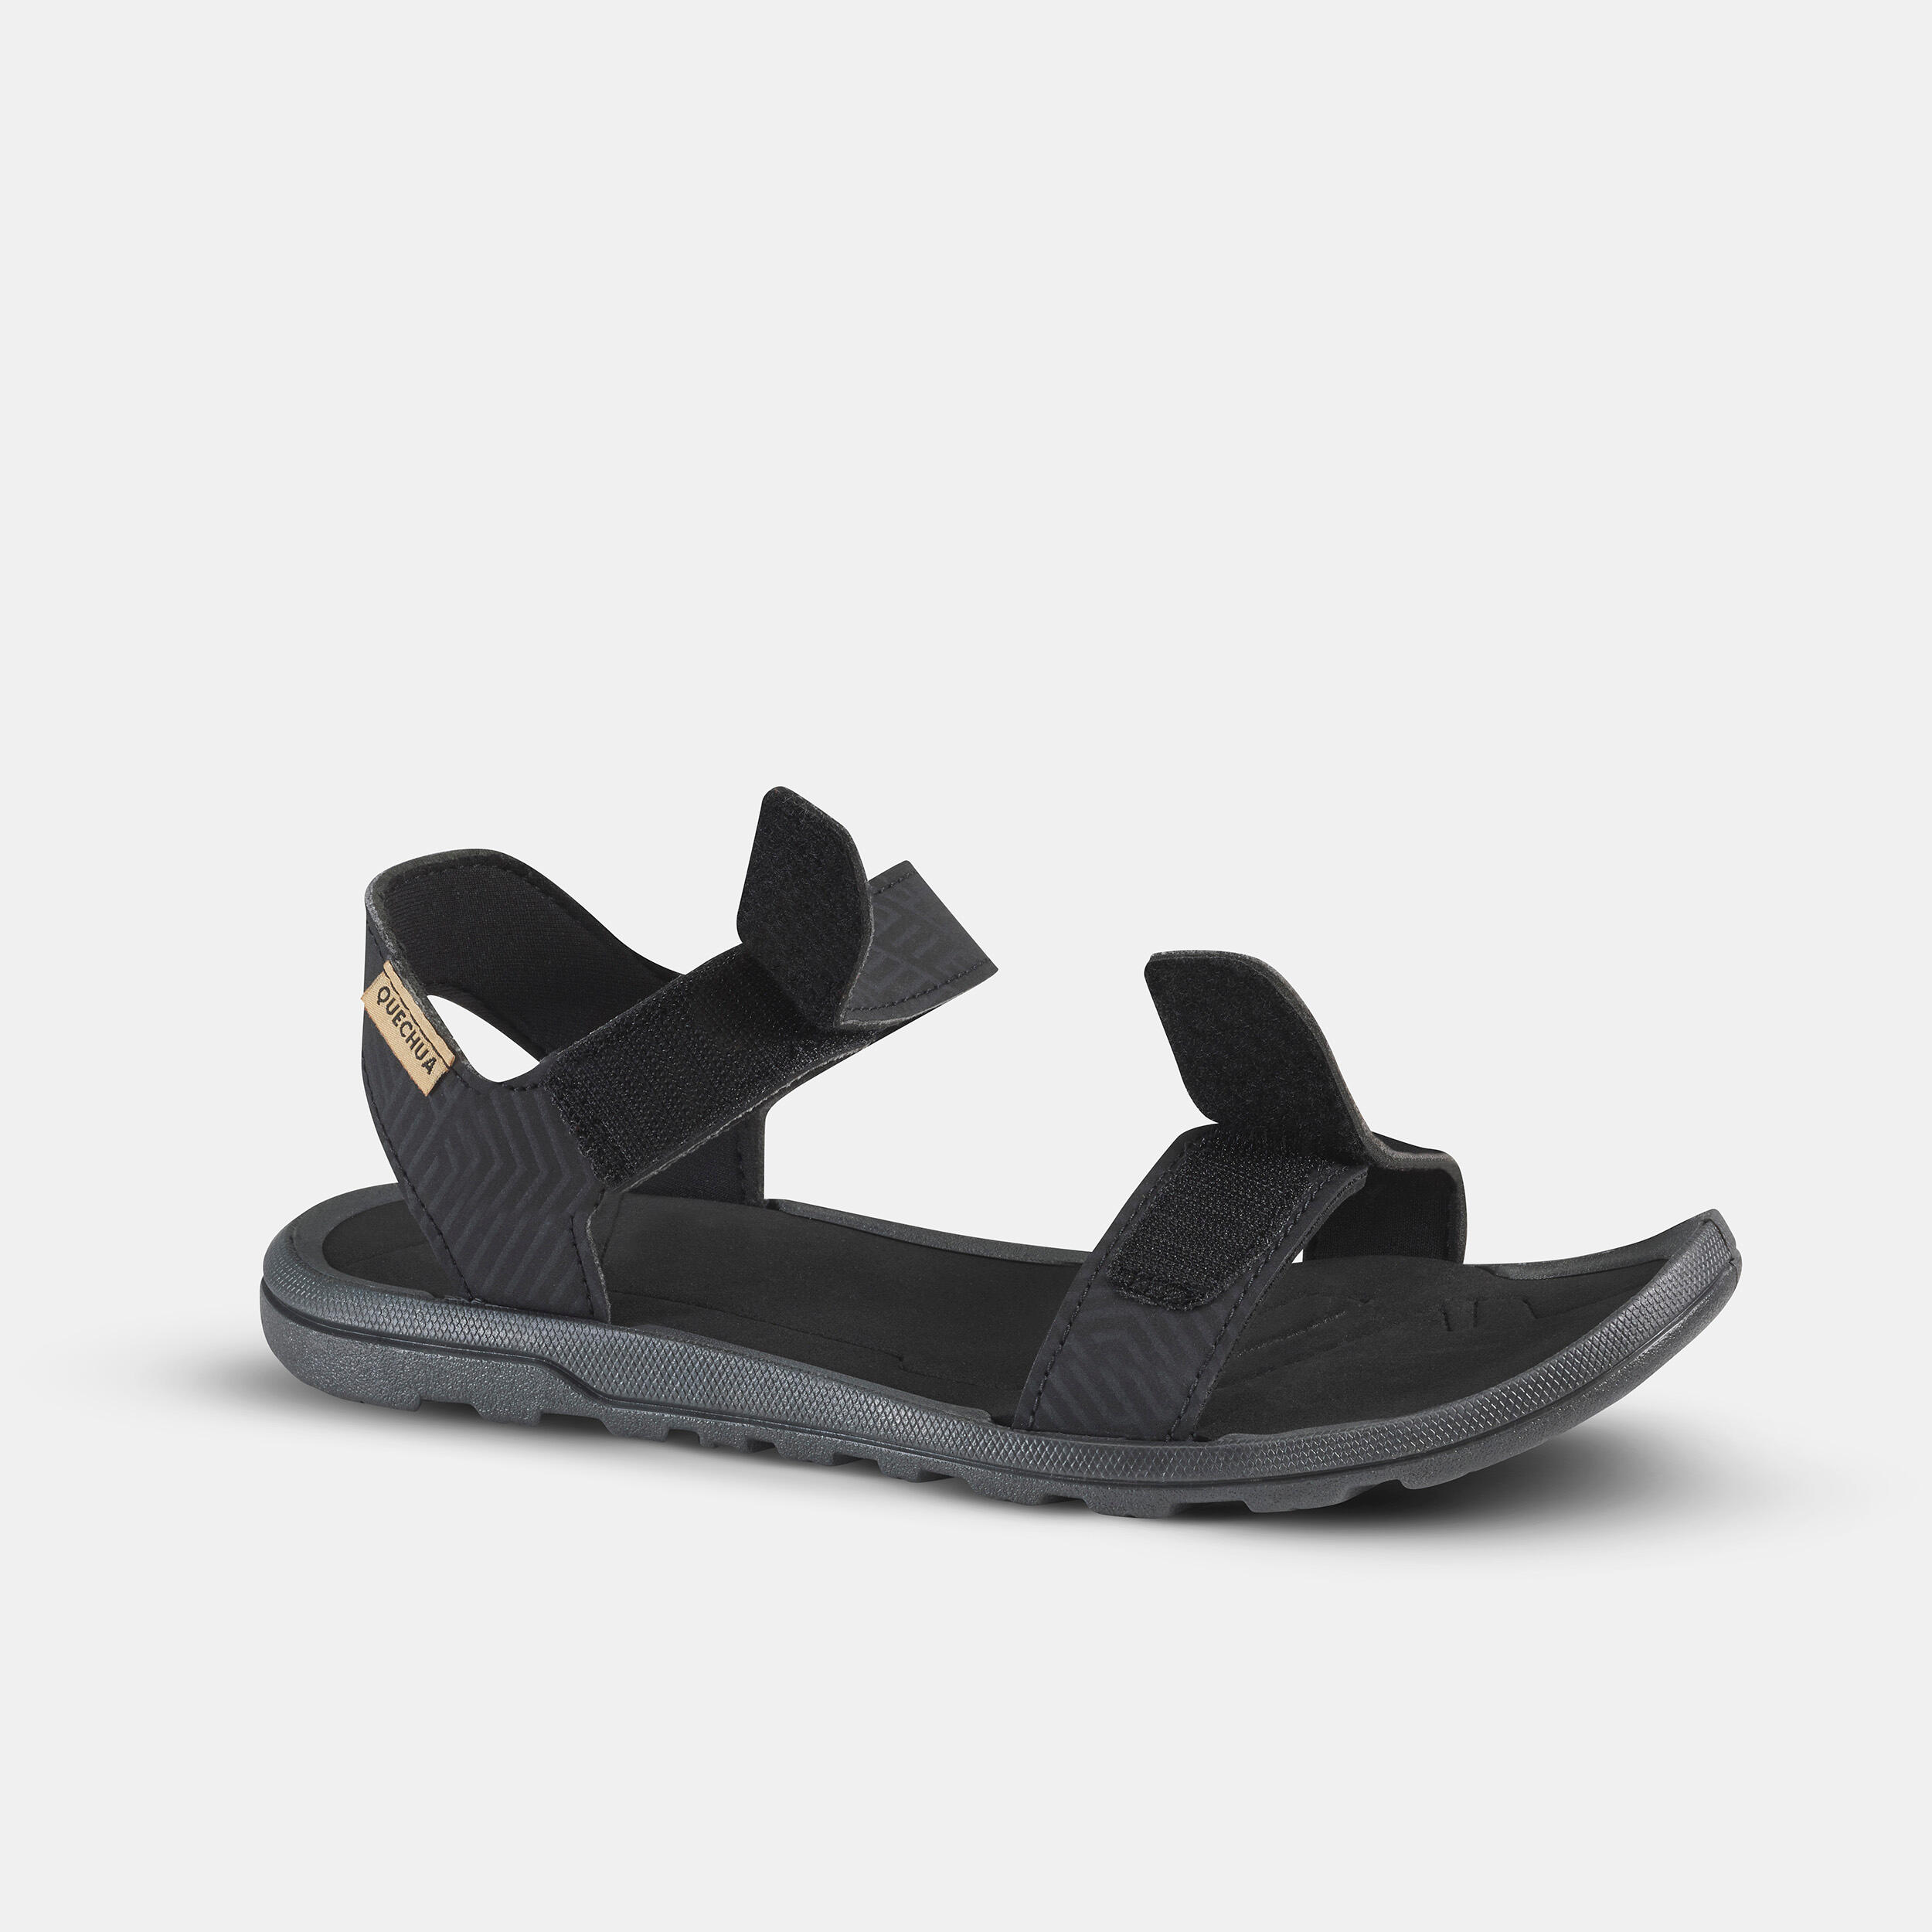 Women’s Post-Hiking Sandals Ecocamp 8/9